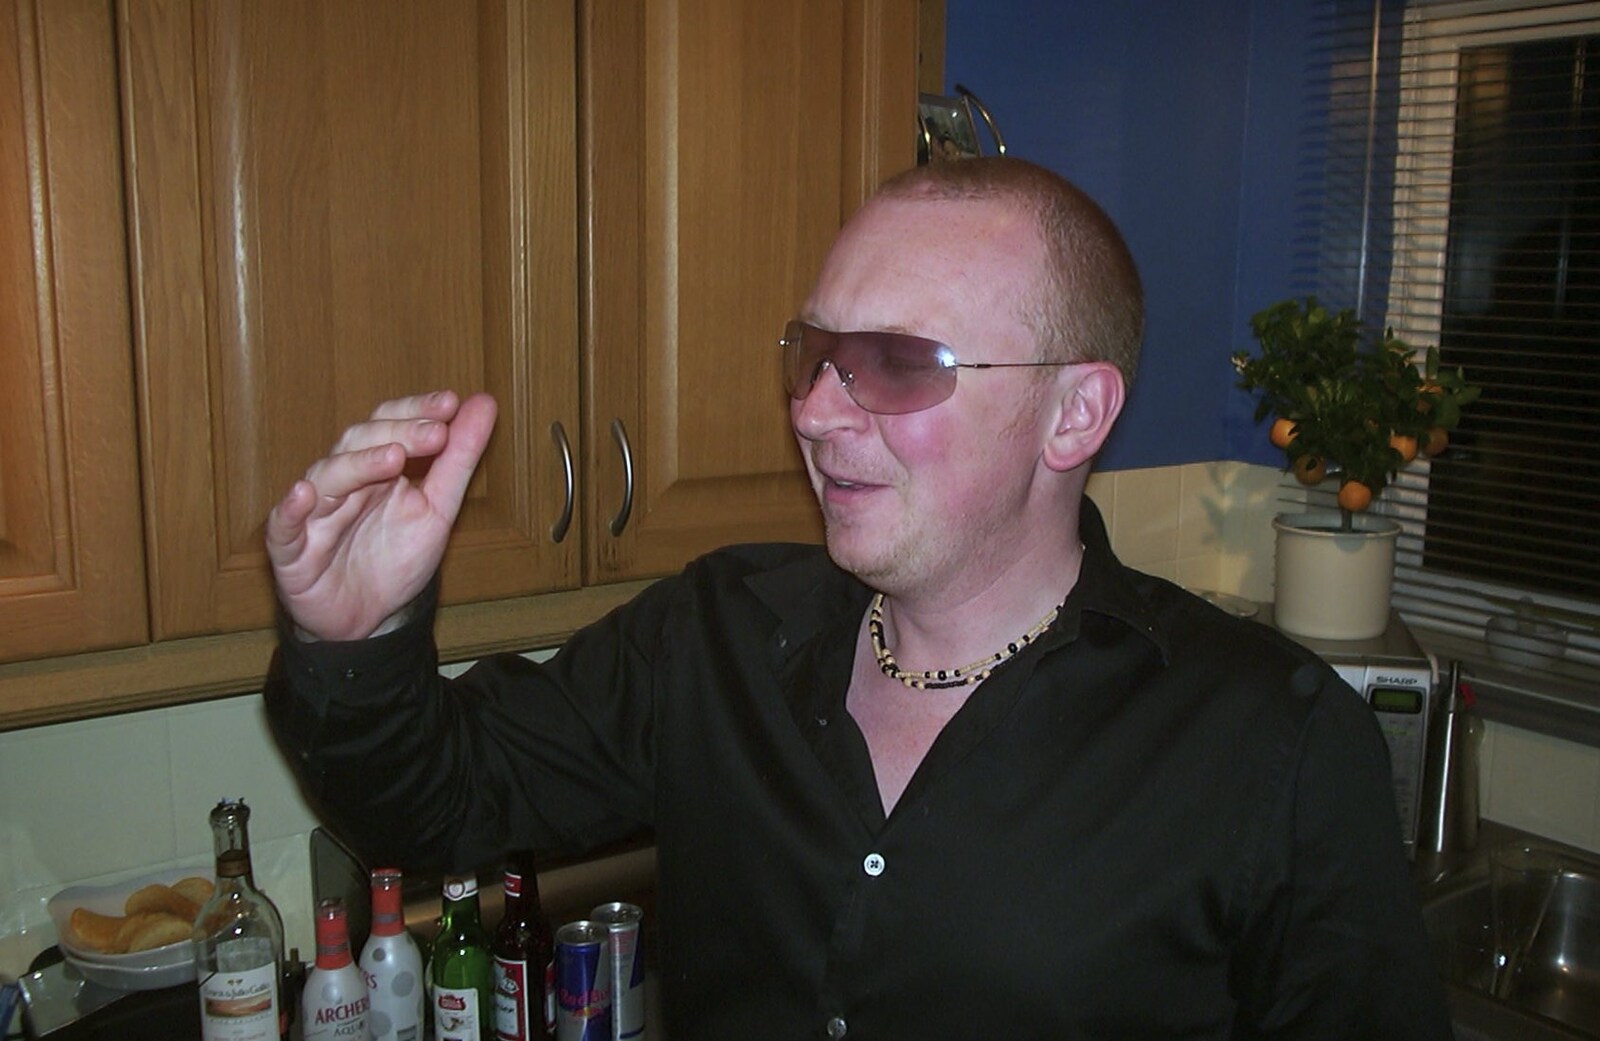 In Michelle's kitchen, Julian models his shades from 3G Lab's Carwash Nightclub by Limo, London - 27th April 2002